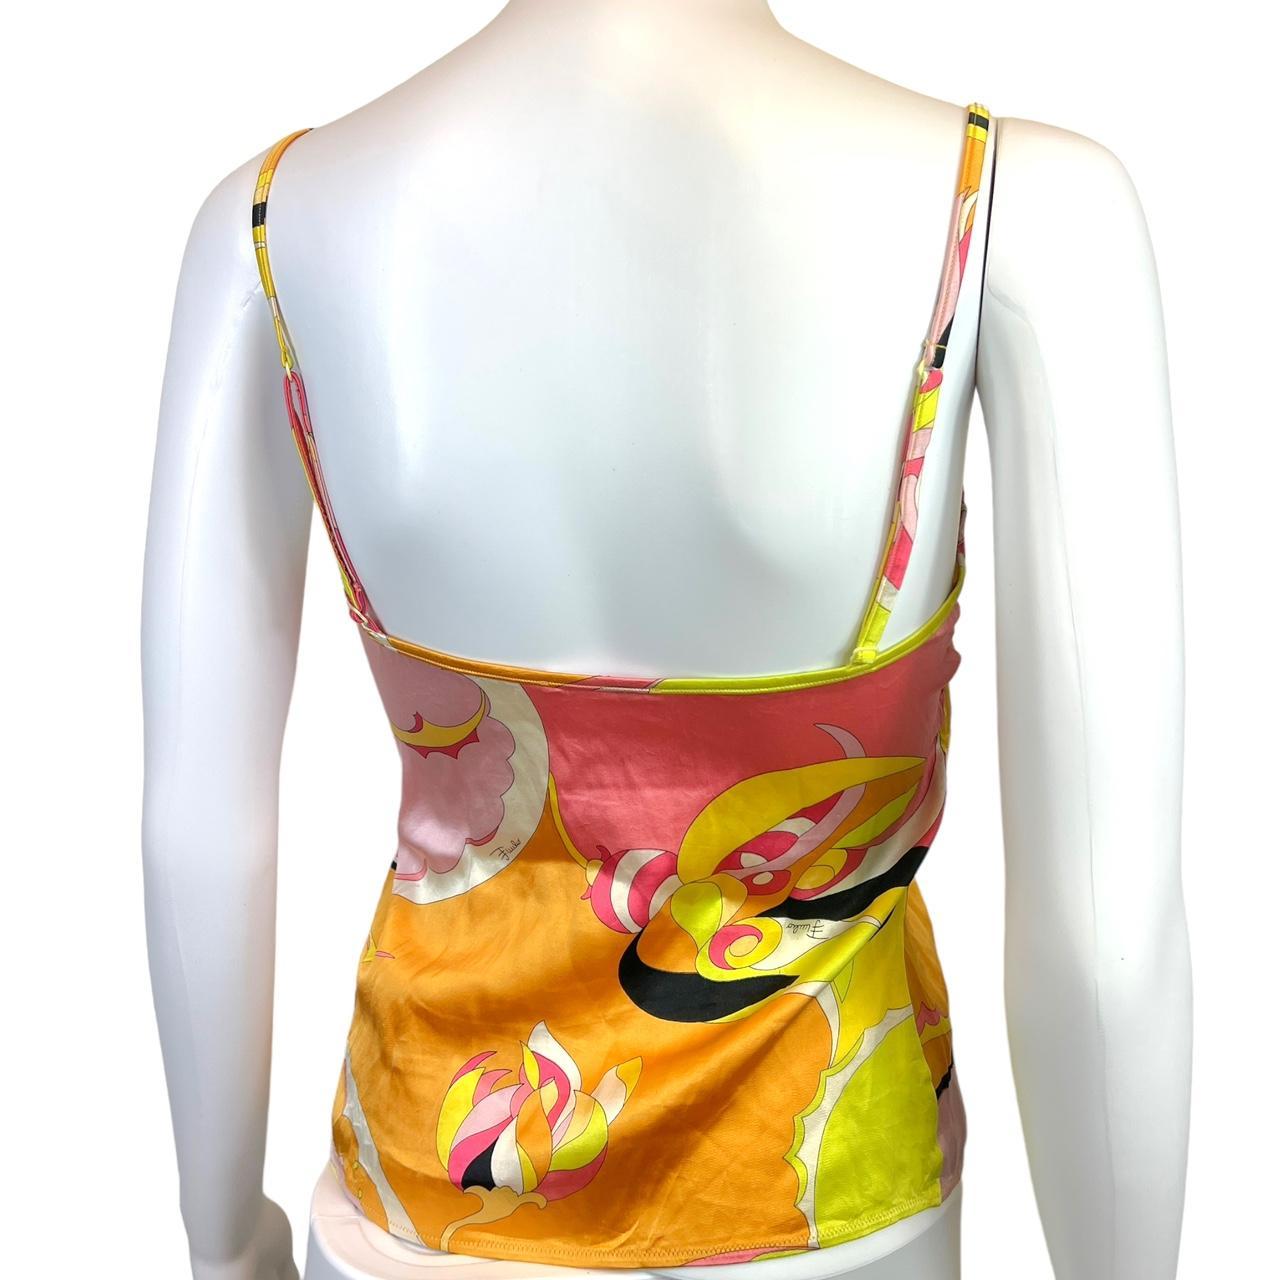 Emilio Pucci Women's Pink and Yellow Vest (4)